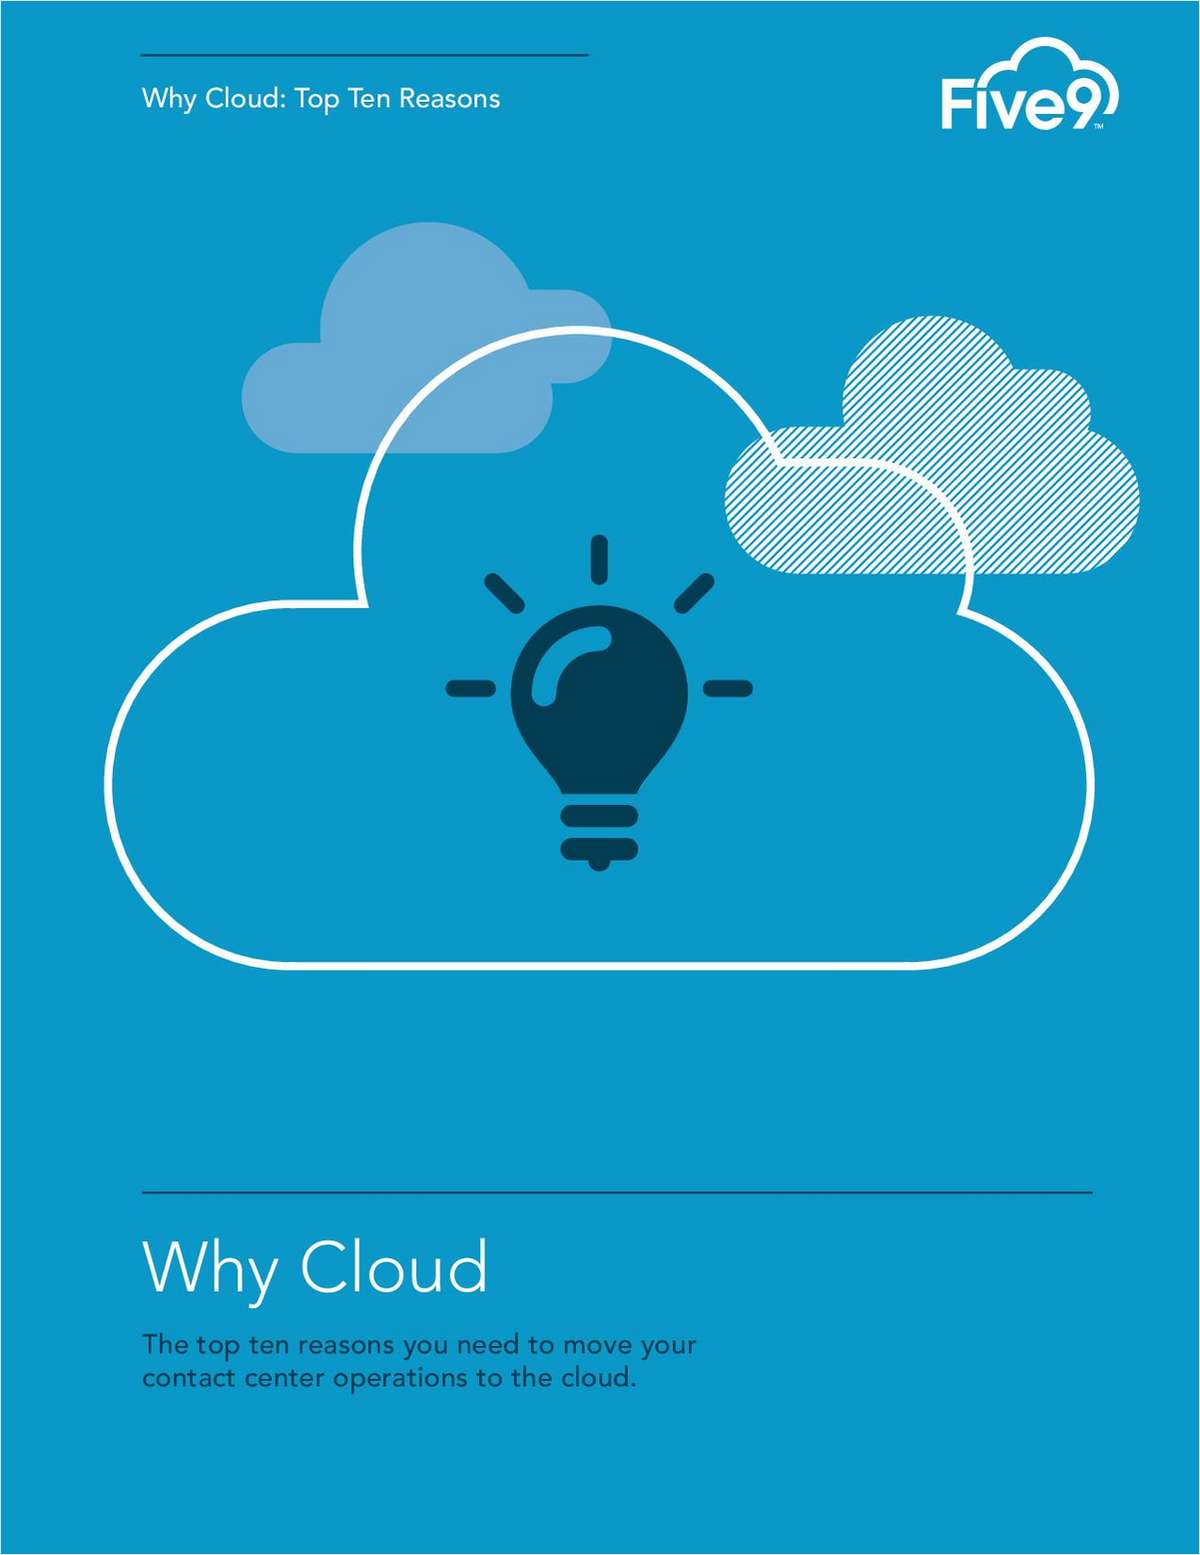 Top Ten Reasons to Move Your Contact Center Operations to the Cloud